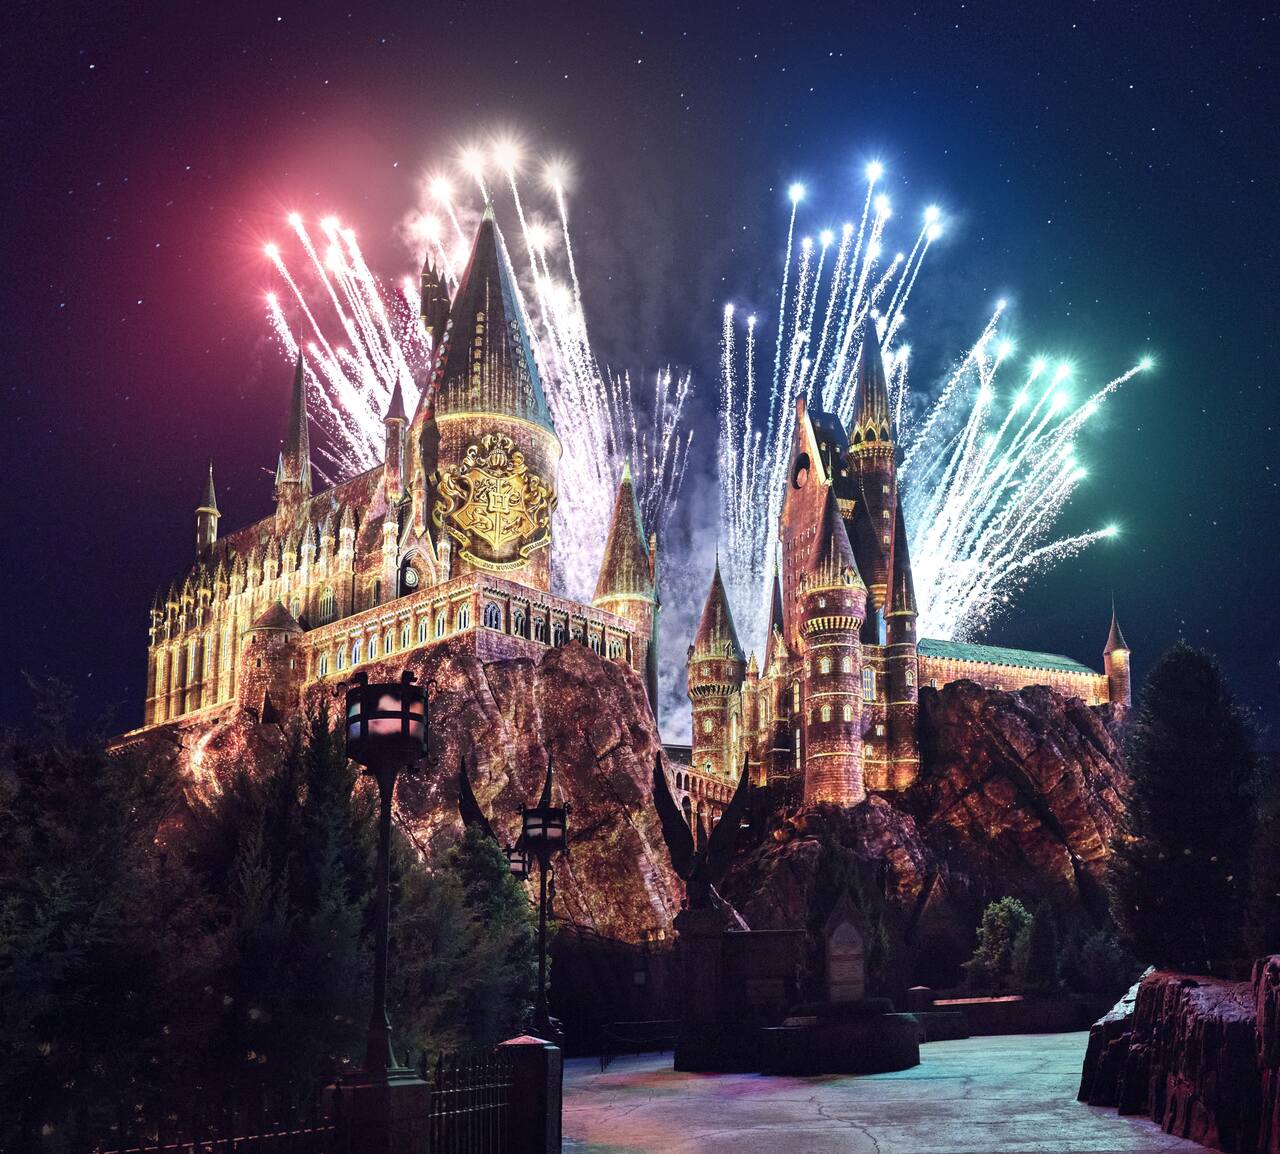 HOGWARTS ALWAYS CASTLE PROJECTION SHOW NO THE WIZARDING WORLD OF HARRY POTTER – HOGSMEADE